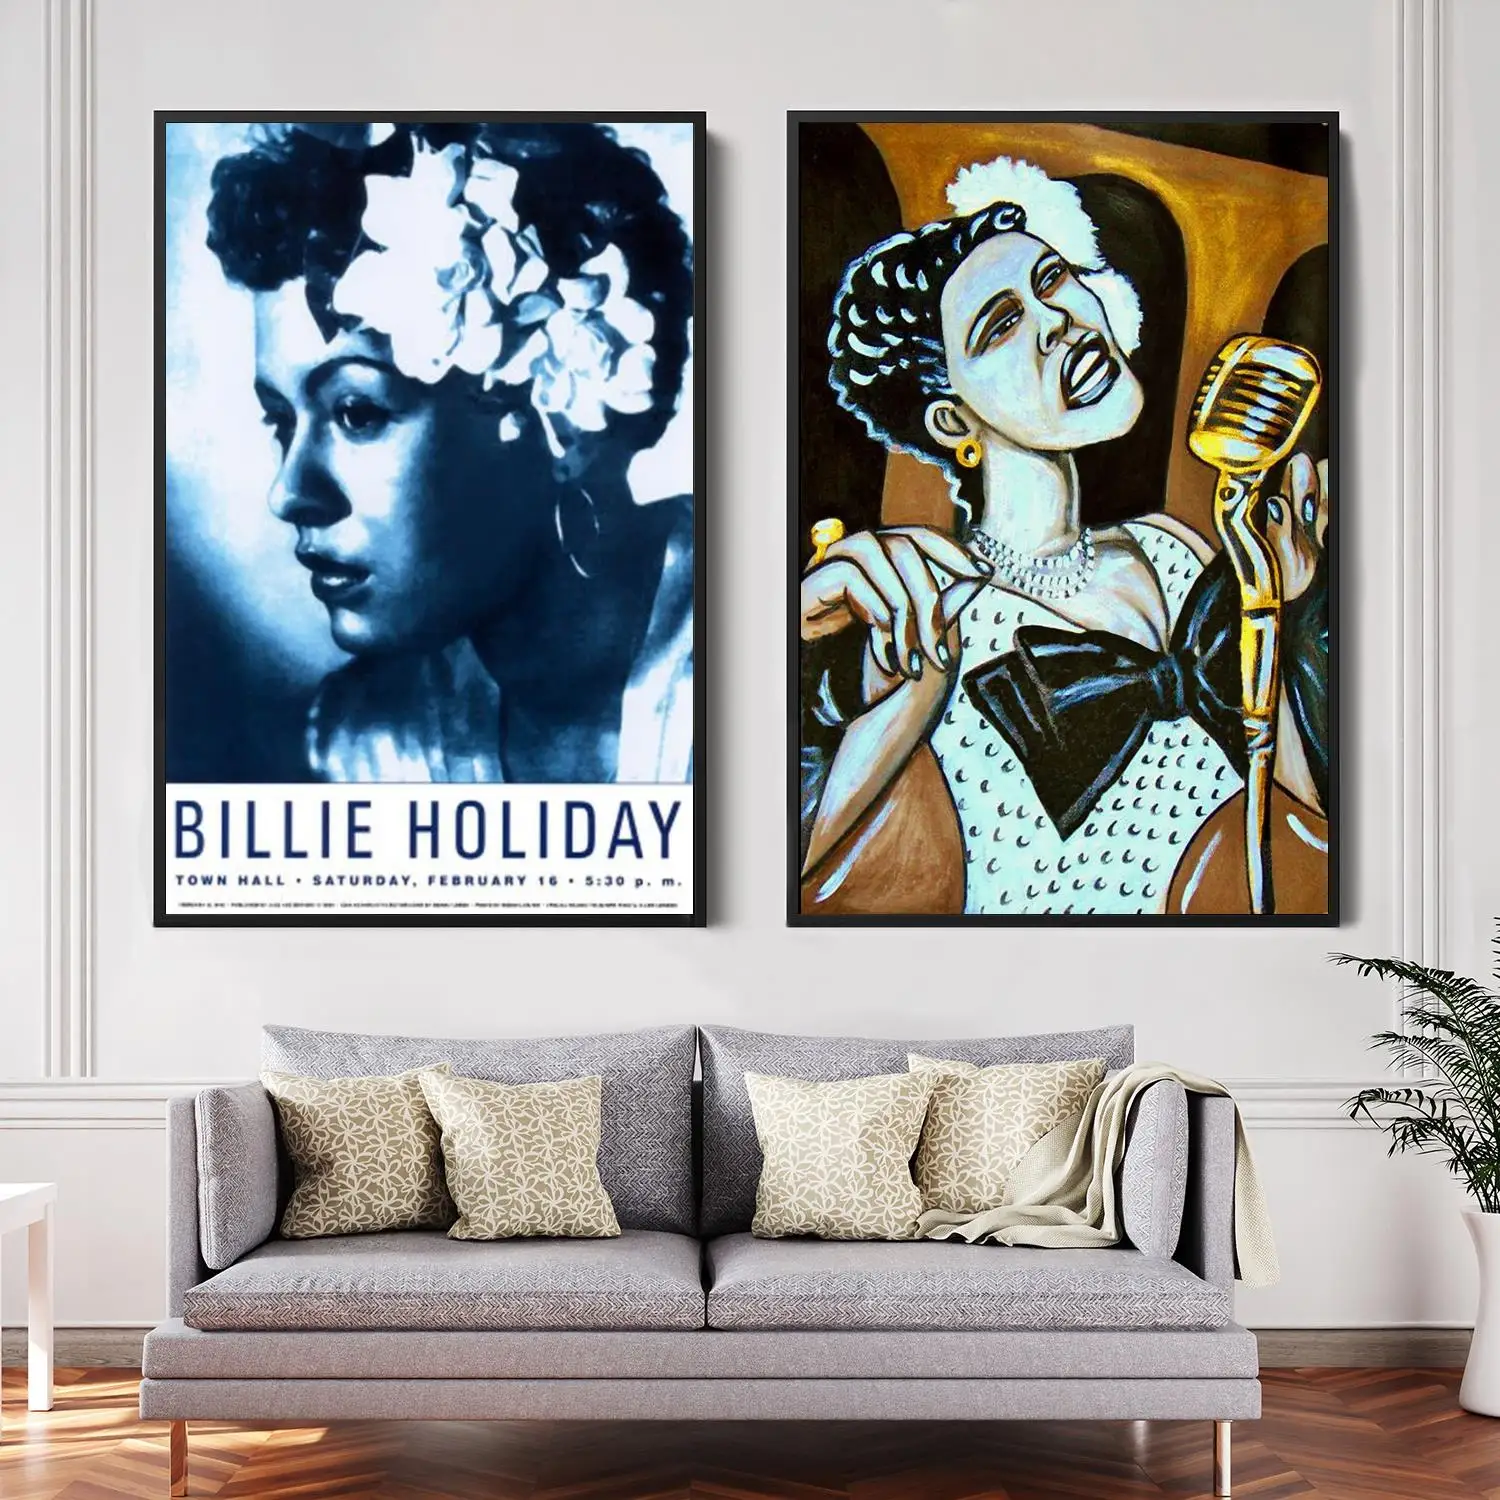 

billie holiday Singer Decorative Canvas Posters Room Bar Cafe Decor Gift Print Art Wall Paintings